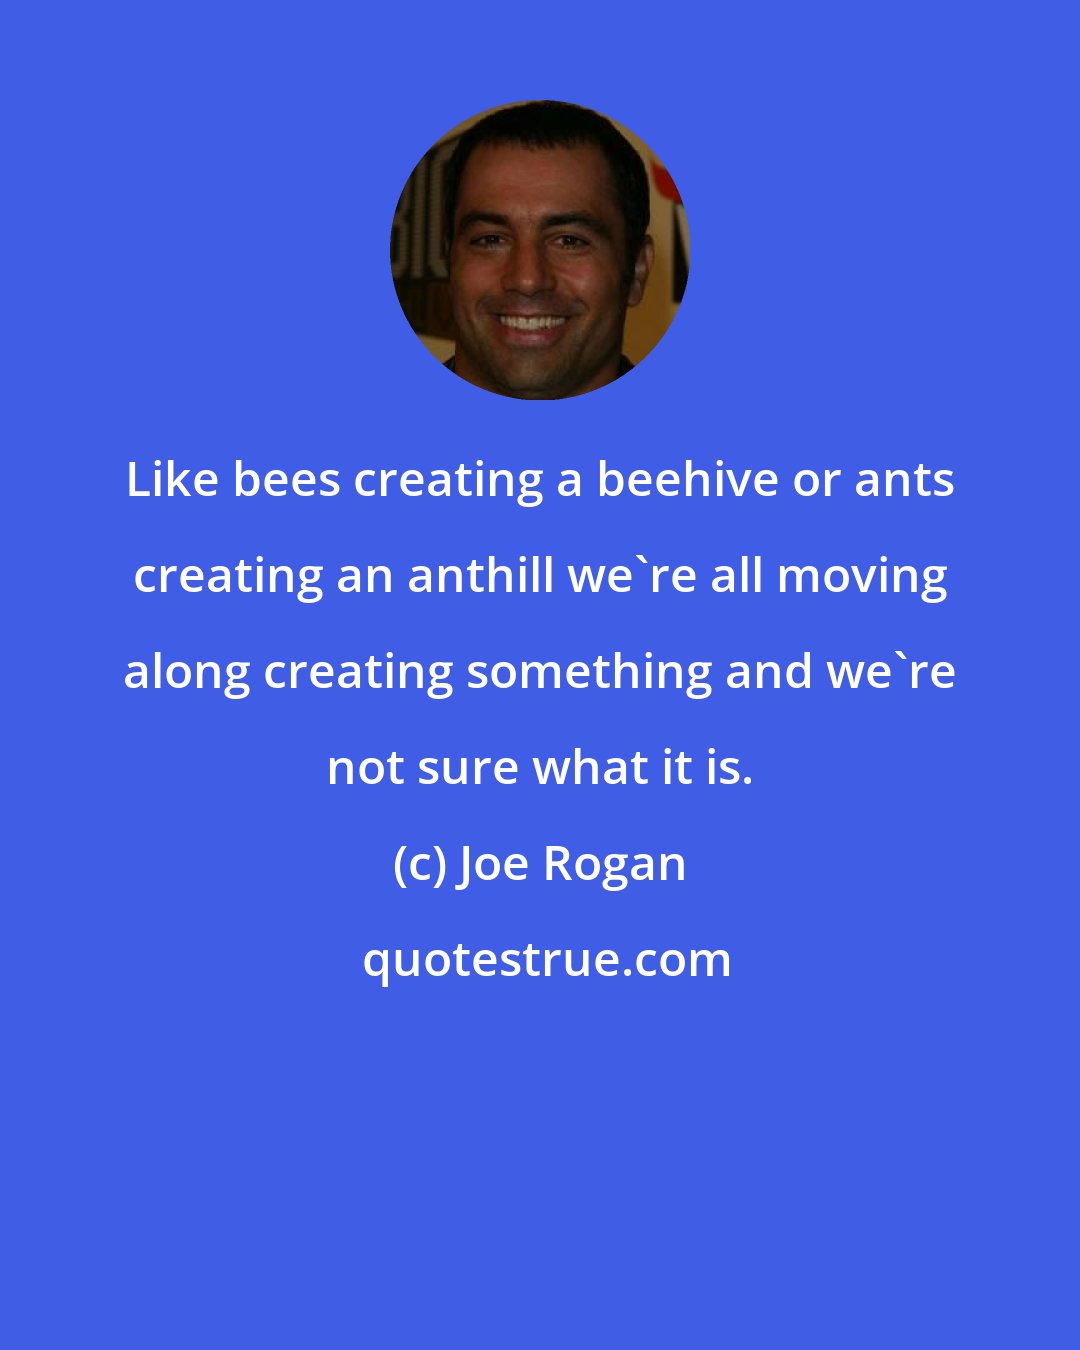 Joe Rogan: Like bees creating a beehive or ants creating an anthill we're all moving along creating something and we're not sure what it is.